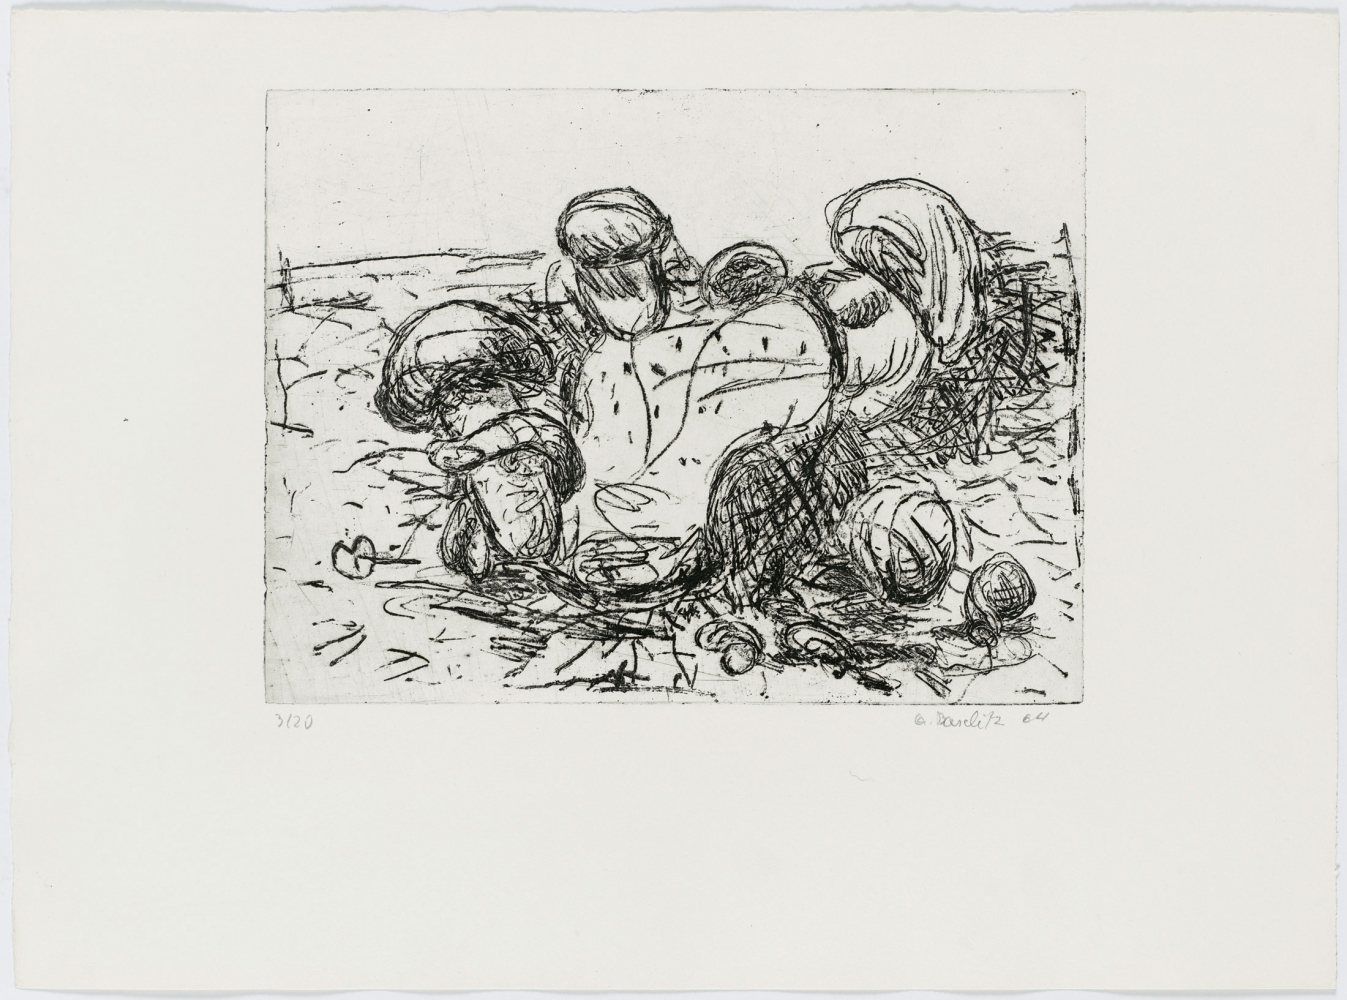 Georg Baselitz
Pilze [Mushrooms], 1964
Signed/Dated: 3/20; G. Baselitz 64
Etching and soft-ground etching on zinc plate; on copper printing paper
Image size: 9 5/8 x 12 7/8 inches (24.4 x 32.7 cm)
Paper size: 15 3/8 x 20 7/8 inches (39.1 x 53 cm)
Framed dimensions: 18 7/8 x 24 3/4 inches (47.9 x 62.9 cm)
&amp;copy; Georg Baselitz 2021
Photo: &amp;copy;&amp;nbsp;bernhardstrauss.com